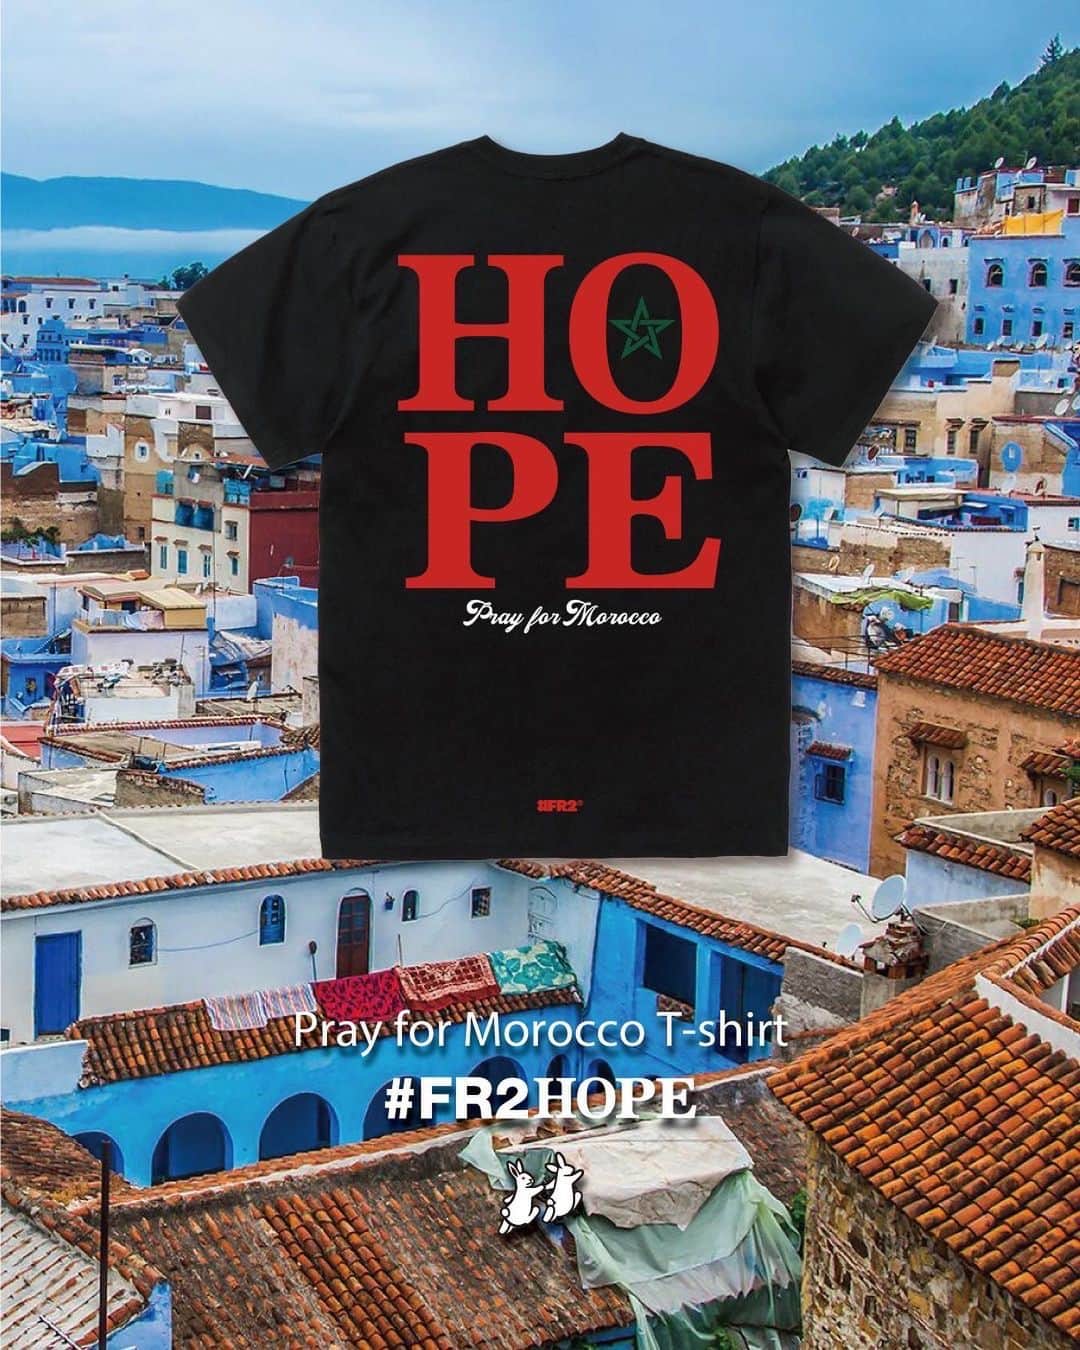 #FR2のインスタグラム：「#FR2Hope As a project, we will provide support for the disaster that occurred in Morocco on September 9th. Starting today, we will start accepting orders at the #FR2 Online Store. All proceeds from product sales, minus the costs involved in producing this project, will be donated to the Japanese Red Cross Society.  Order period: September 12th (Tuesday) to September 18th (Monday), 2023  #FR2希望 プロジェクトとして、9月9日にモロッコで発生した災害への支援を行います。 本日から #FR2 Online Storeで受注販売を開始いたします。 こちらの企画の制作にかかわるコストを引いた商品の売上の全ては、日本赤十字社に寄付します。  受注期間：2023年9月12日（火）～18日（月）  #FR2Hope 作为一个项目，我们将为 9 月 9 日摩洛哥发生的灾难提供支持。 从今天开始，我们将开始在 #FR2 在线商店接受订单。 产品销售的所有收益，减去制作该项目所涉及的成本，将捐赠给日本红十字会。  订购时间：2023年9月12日（星期二）至9月18日（星期一）  #FR2Hope 作為一個項目，我們將為 9 月 9 日摩洛哥發生的災難提供支持。 從今天開始，我們將開始在 #FR2 在線商店接受訂單。 產品銷售的所有收益，減去製作該項目所涉及的成本，將捐贈給日本紅十字會。  訂購時間：2023年9月12日（星期二）至9月18日（星期一）  #FR2希望　#FR2HOPE」